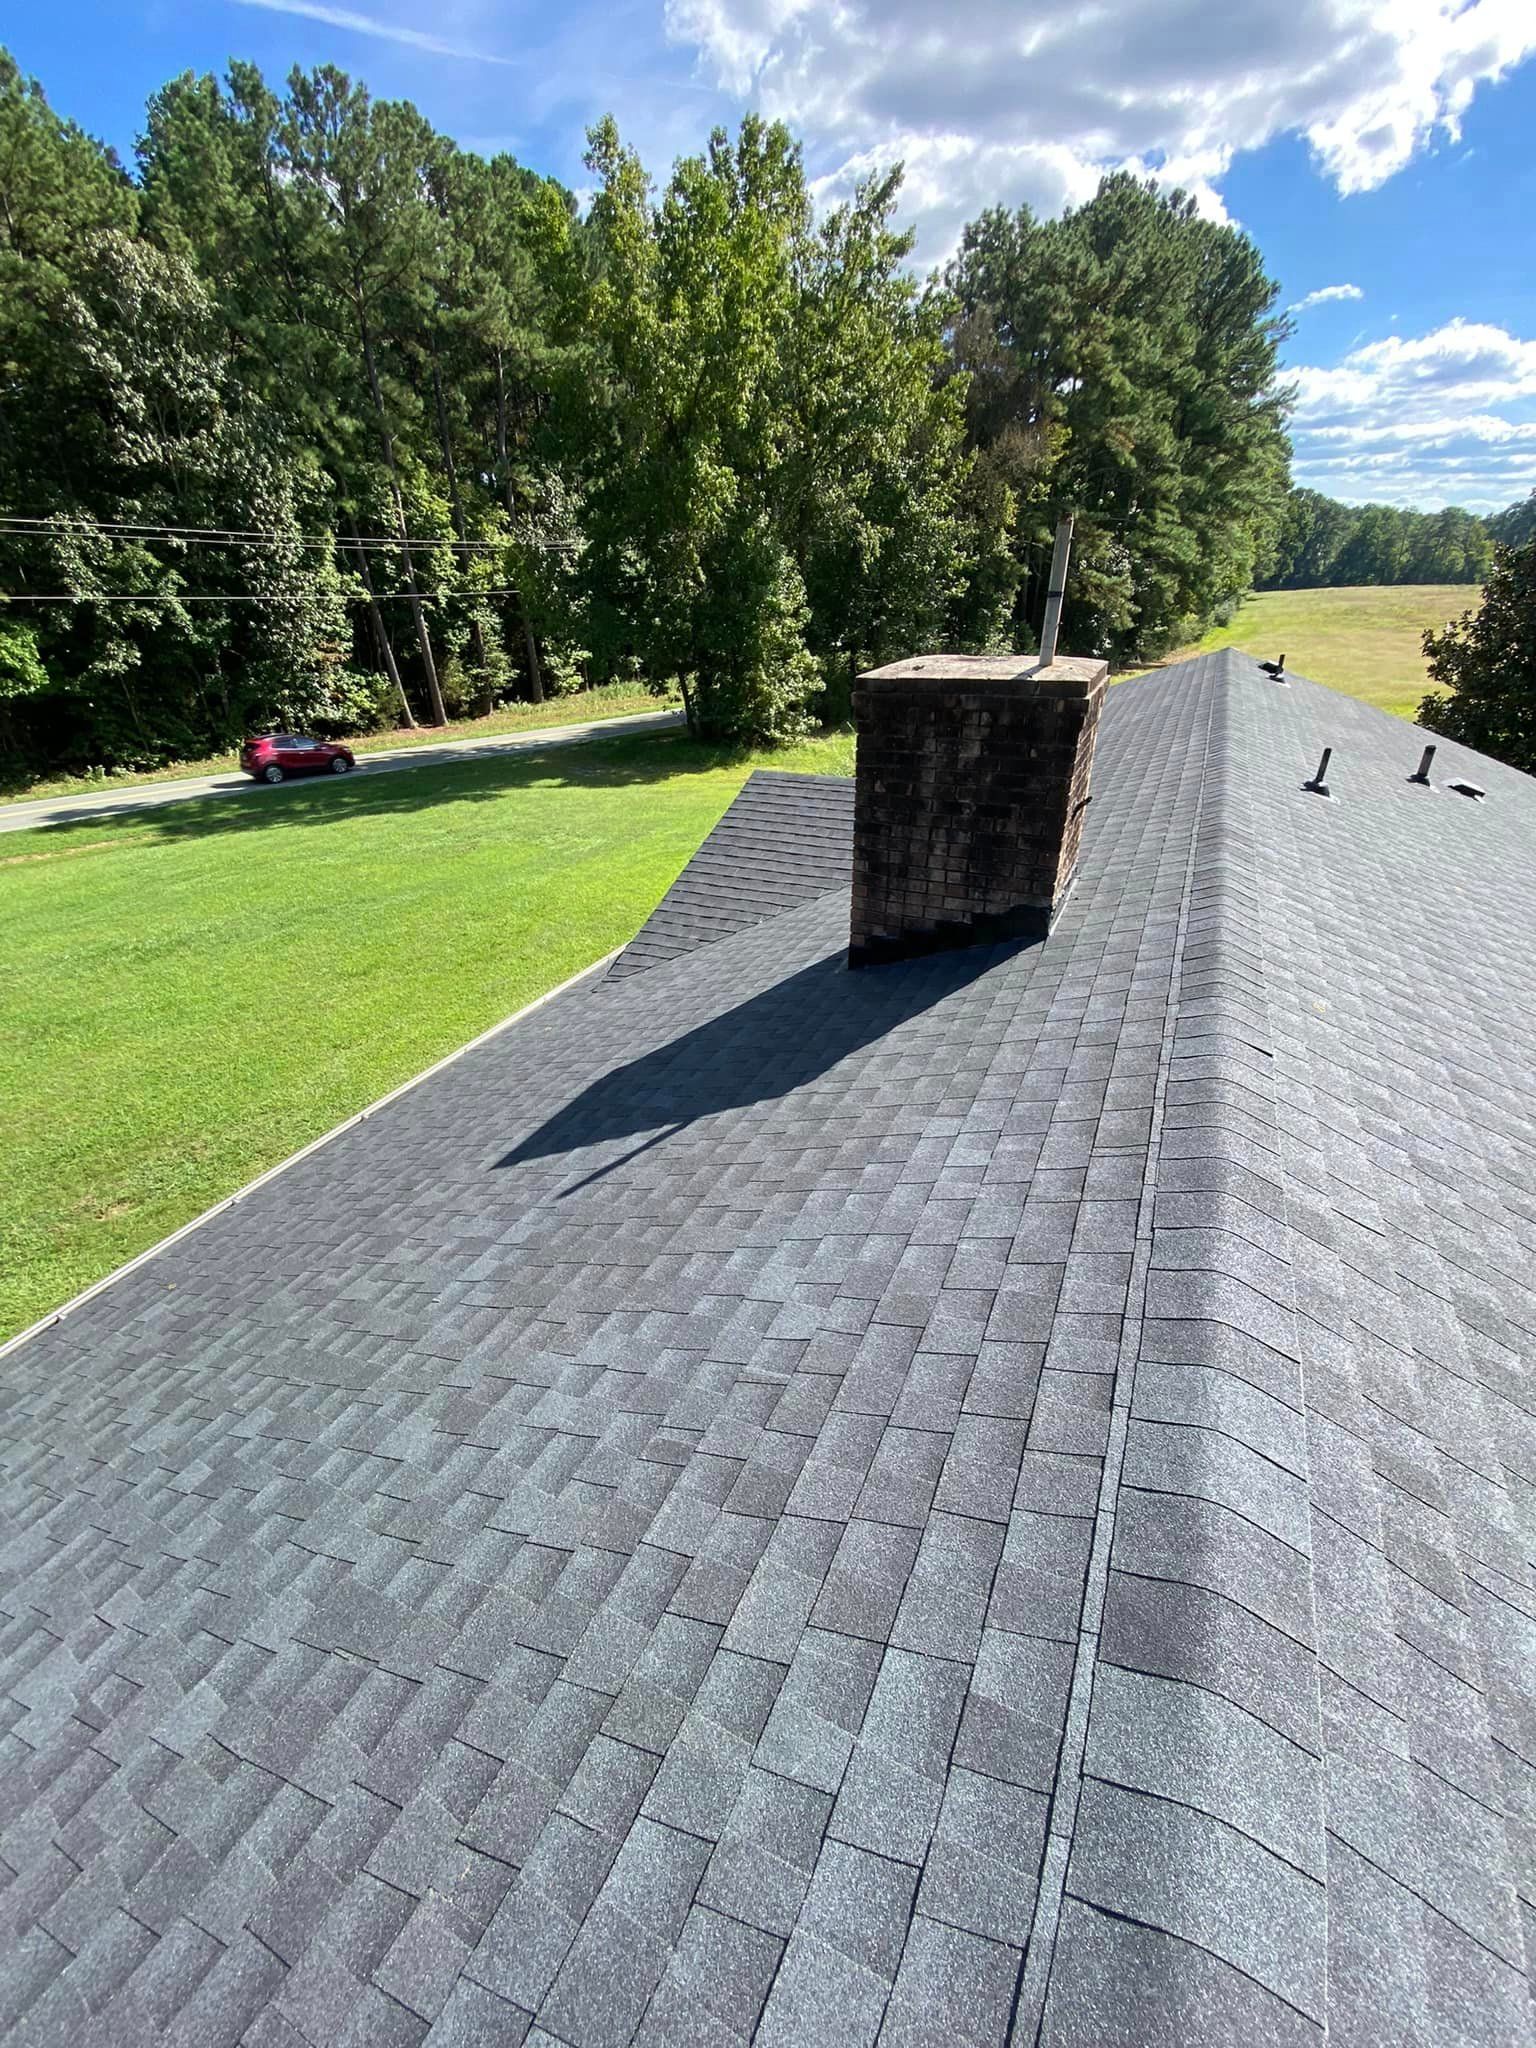 All Photos for West Hills Roofing LLC in Hillsborough, NC